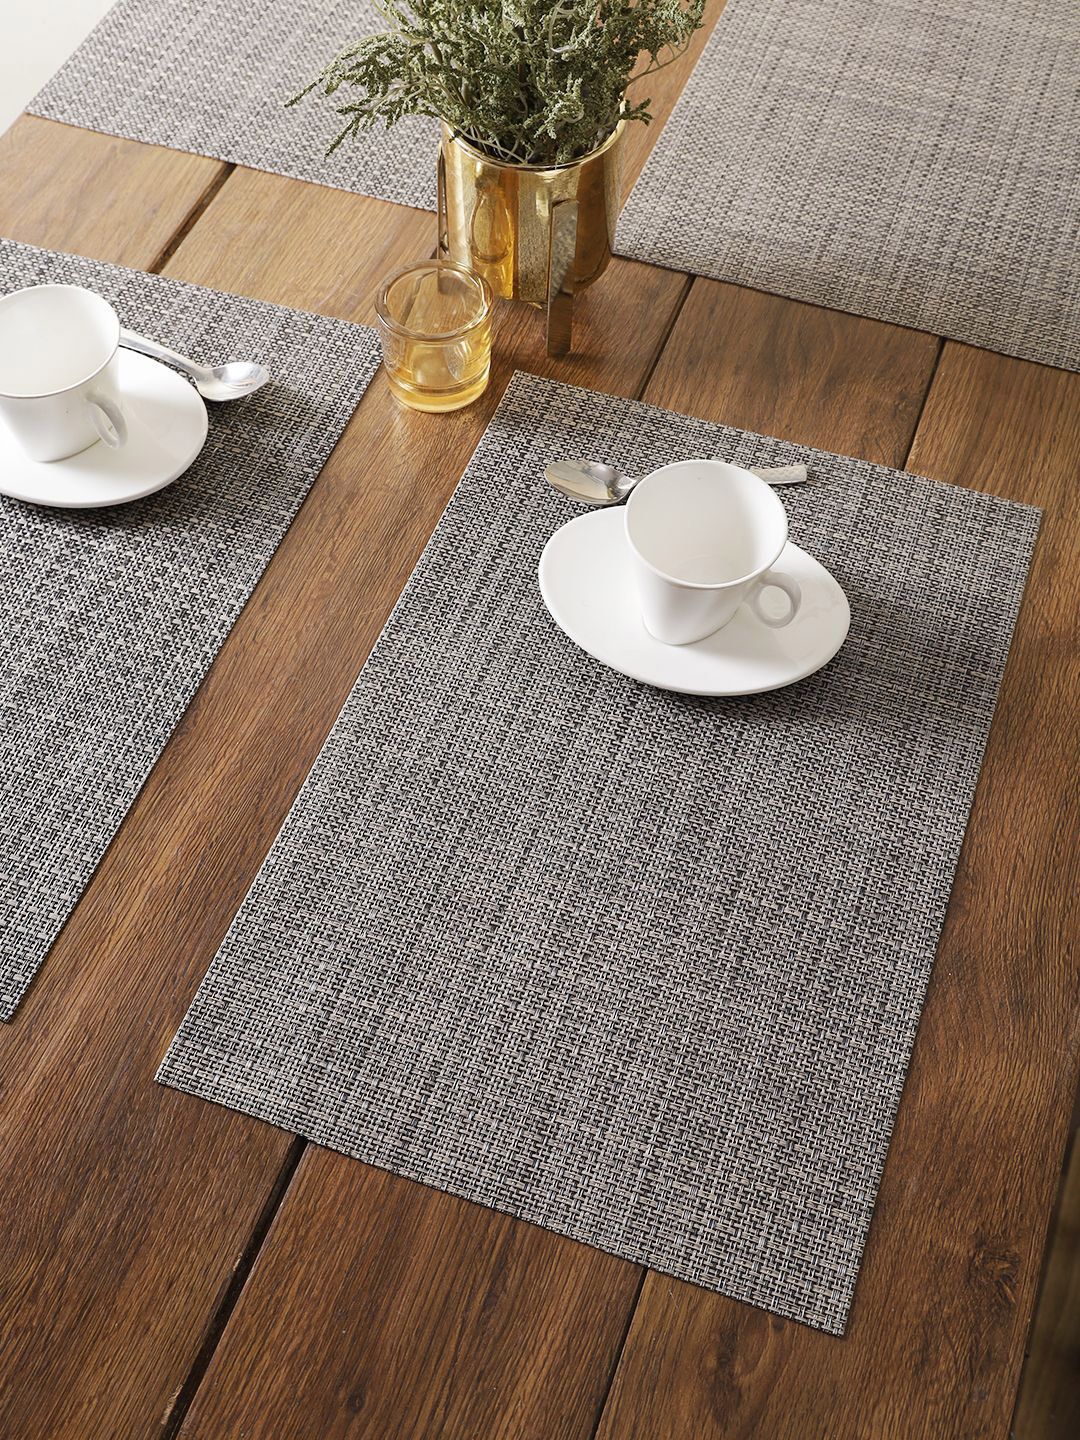 BIANCA Set Of 6 Grey Woven Table Placemats Price in India